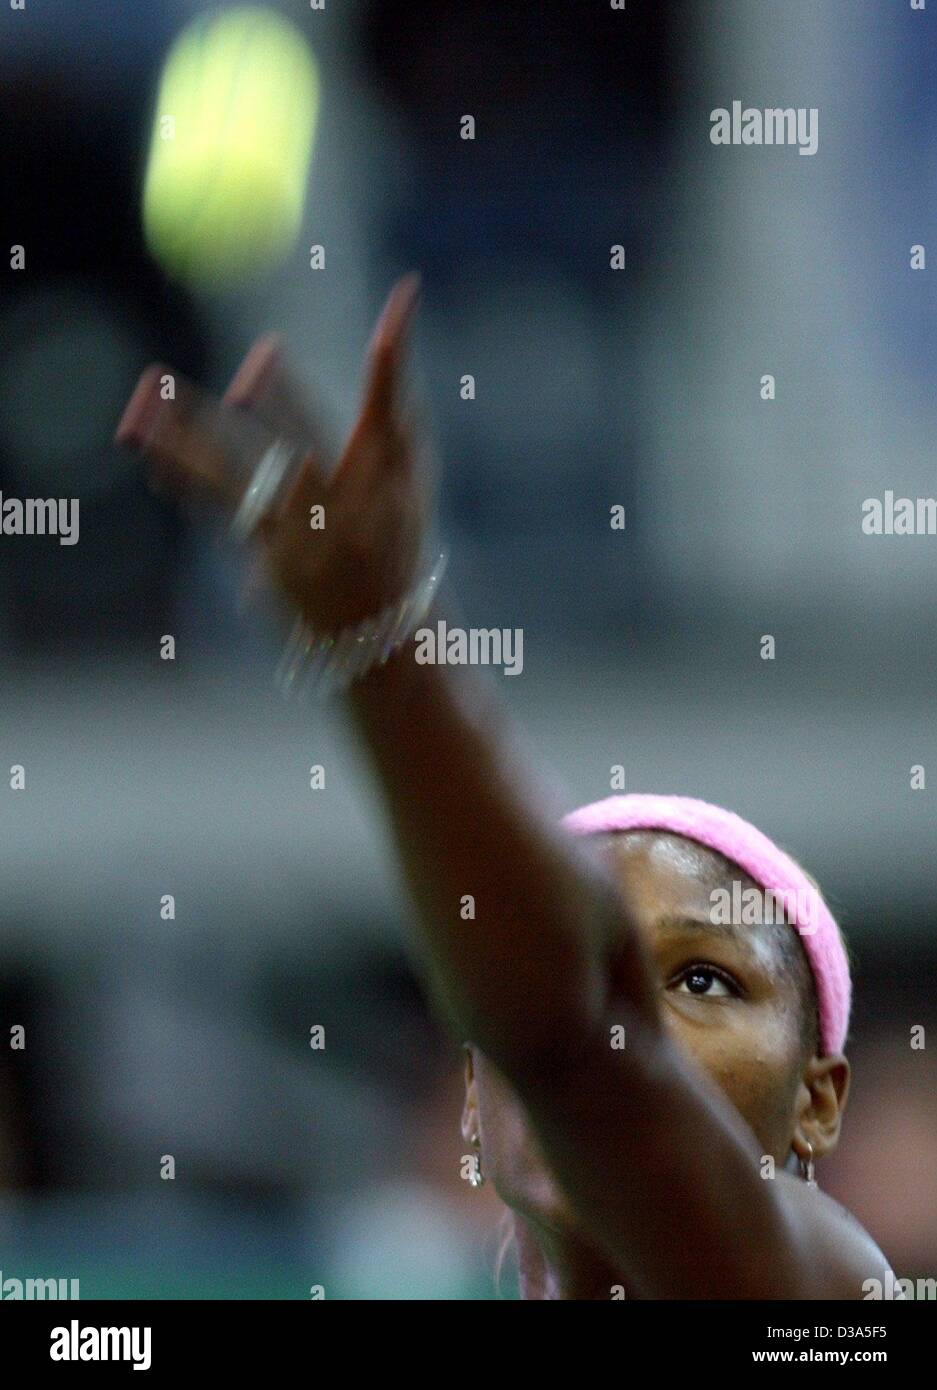 (dpa) - US tennis player Serena Williams serves during the final match of the 13th International Sparkassen Cup WTA Tournament in Leipzig, Germany, 29 September 2002. She defeated Anastasia Myskina 6:3 and 6:2. Stock Photo